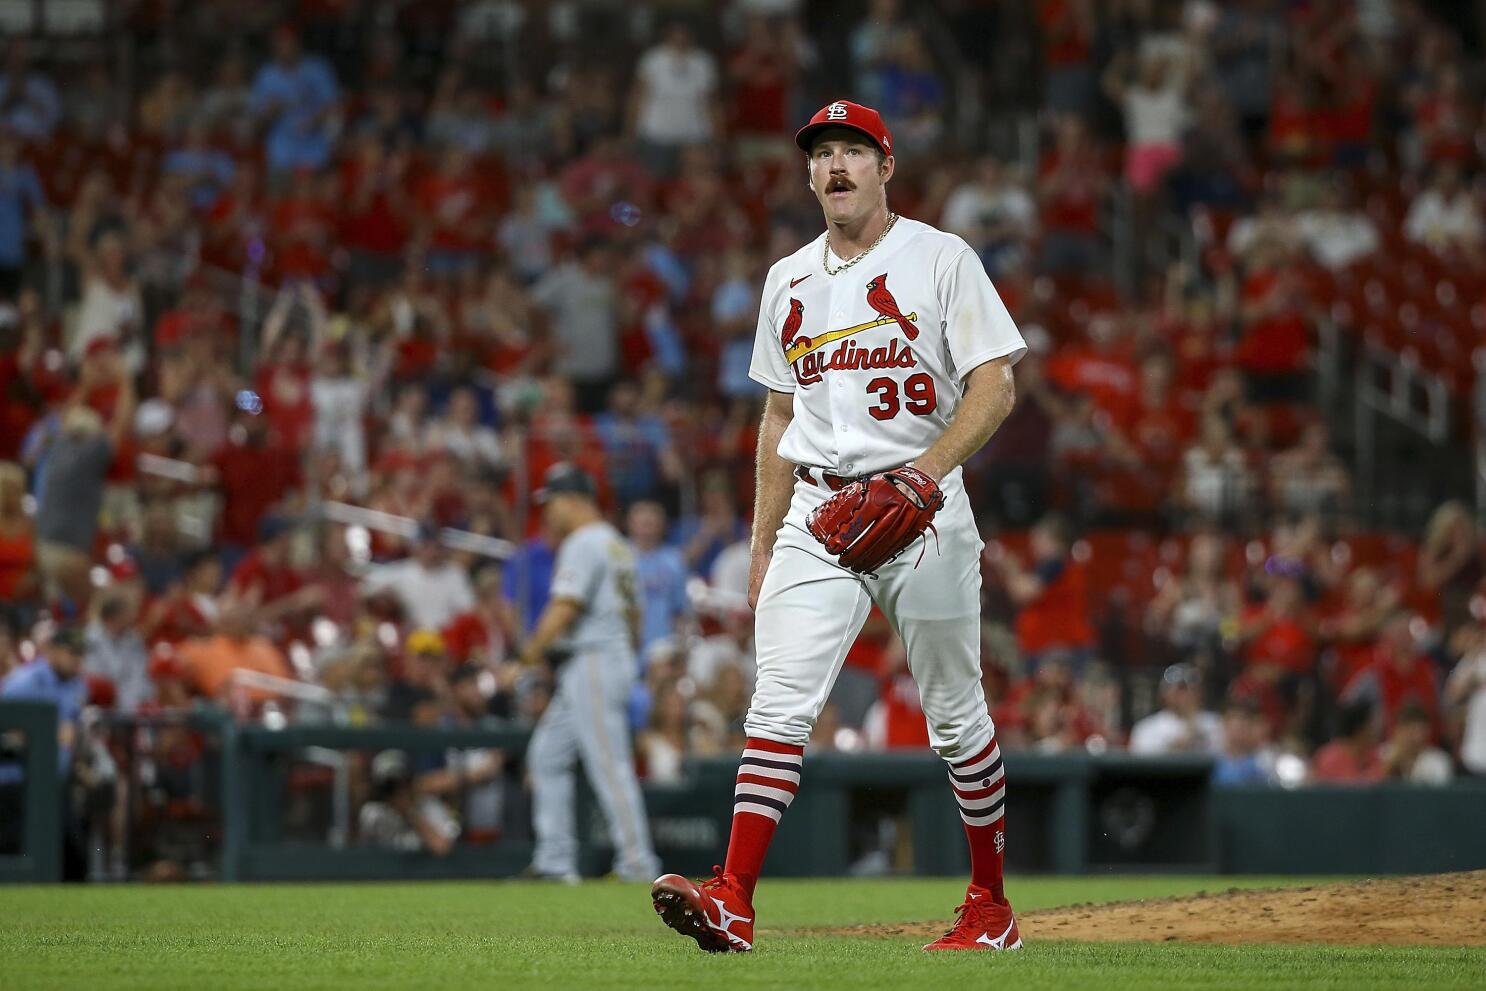 Cardinals beat the Mets 5-3 to stop their slide